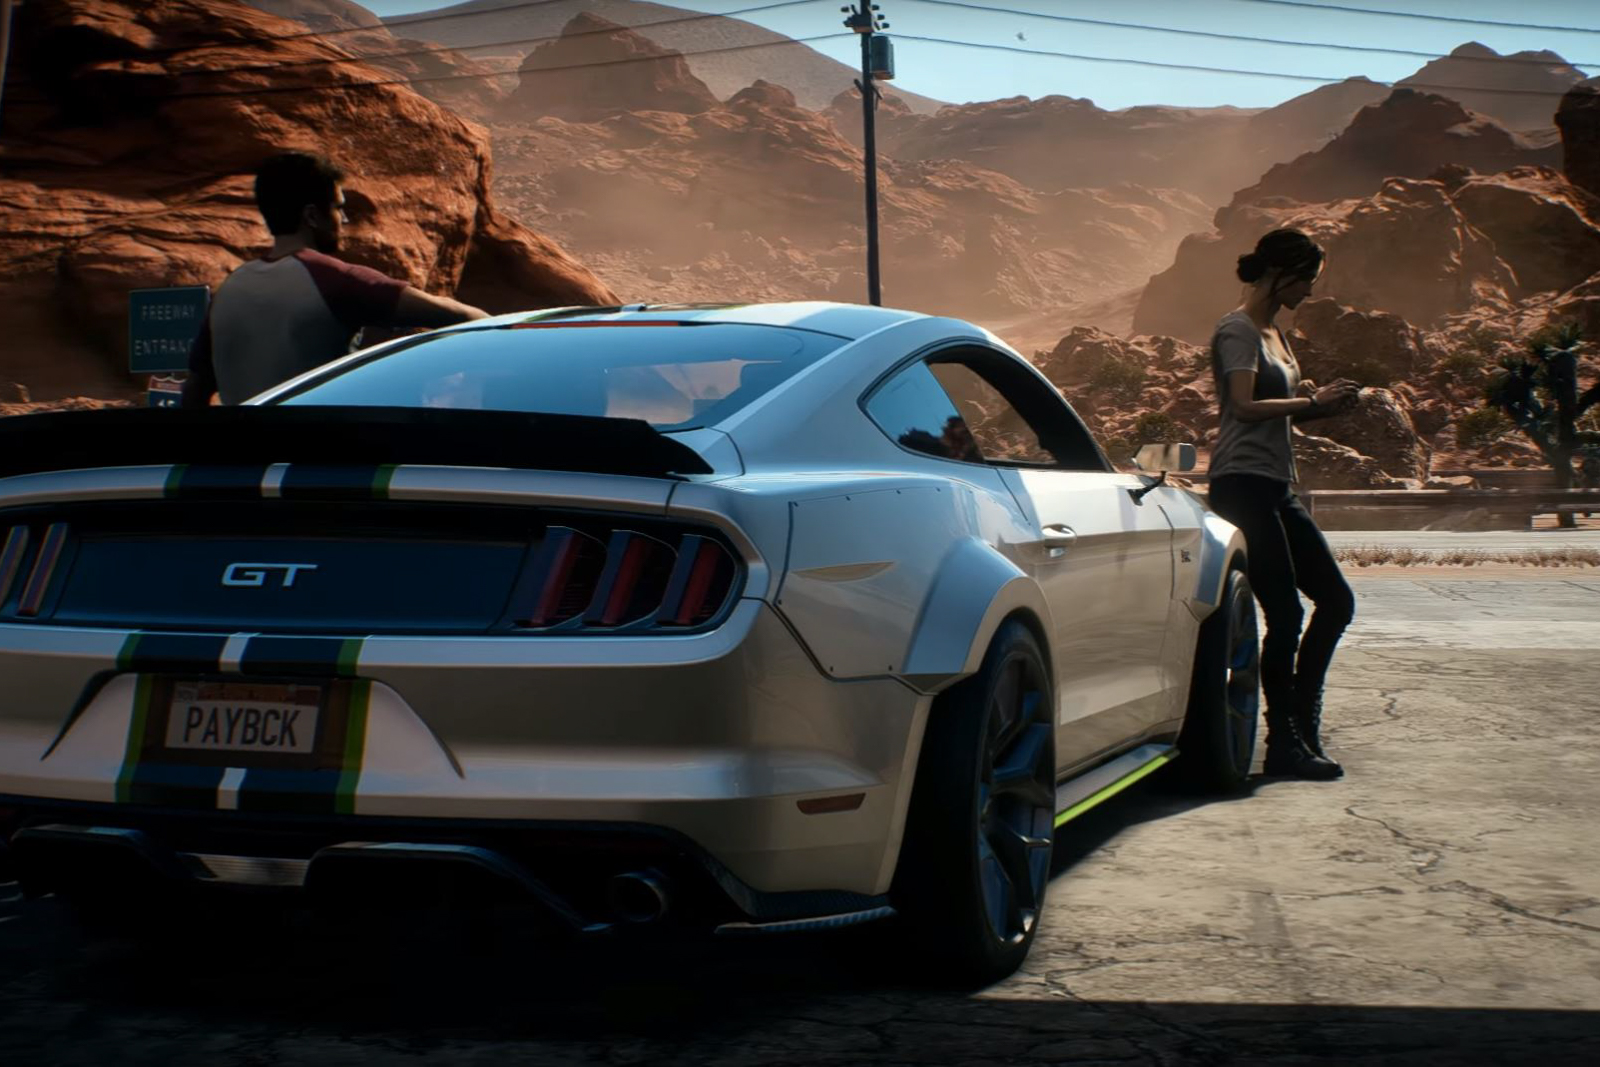 Need for speed 2017. Ford Mustang NFS Payback. Need for Speed Payback Ford Mustang. NFS Payback Форд Мустанг. Ford Mustang RTR 2015 Payback.